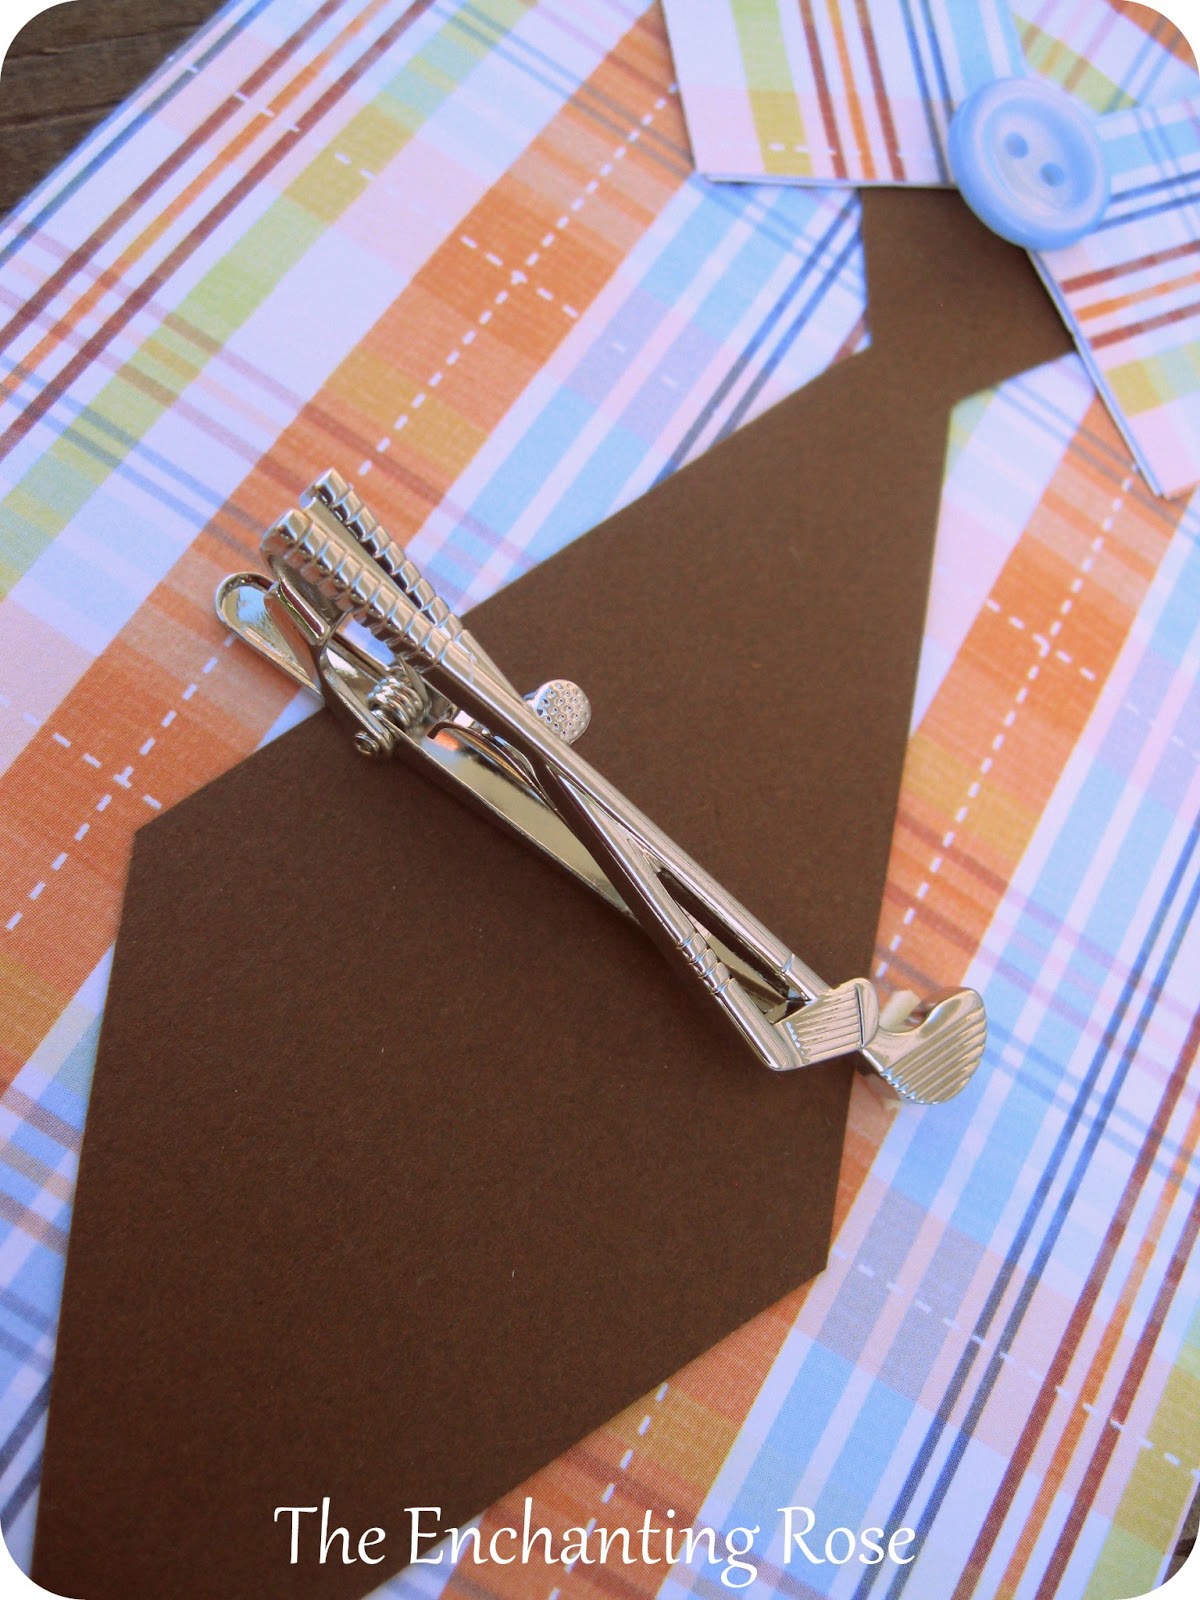 The Enchanting Rose: Father's Day Tie Clip Card